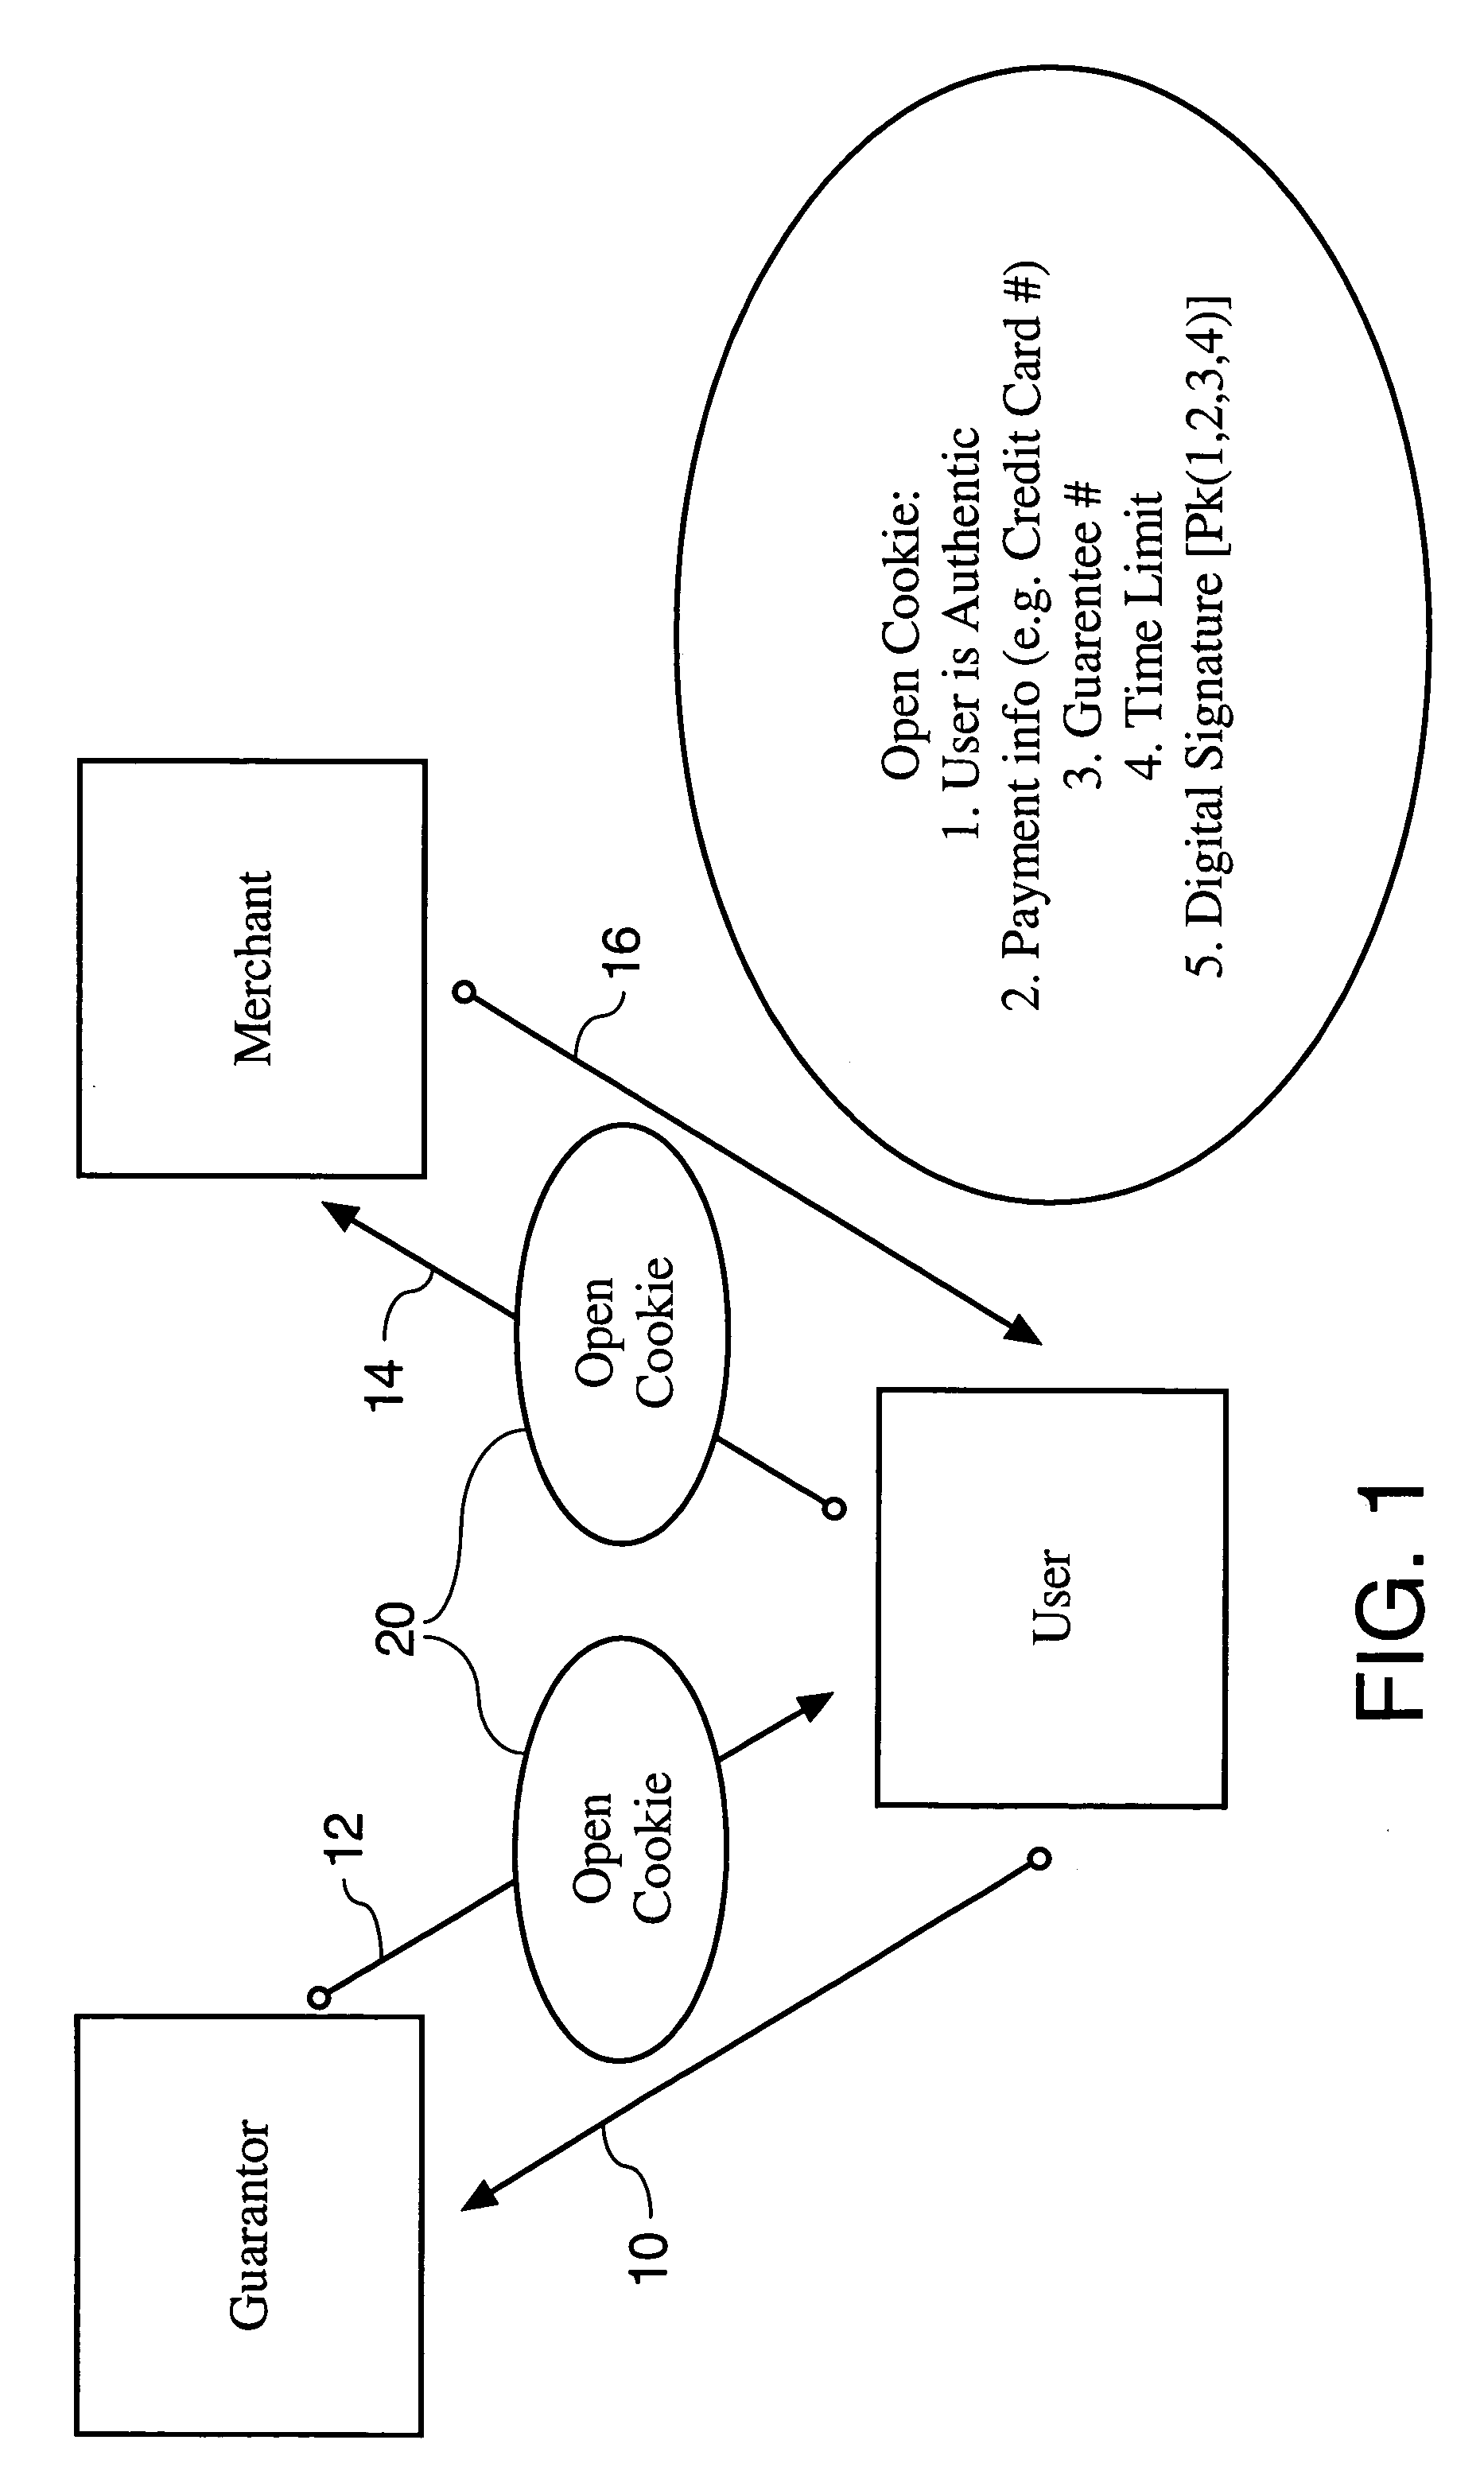 Method and system for secure guaranteed transactions over a computer network